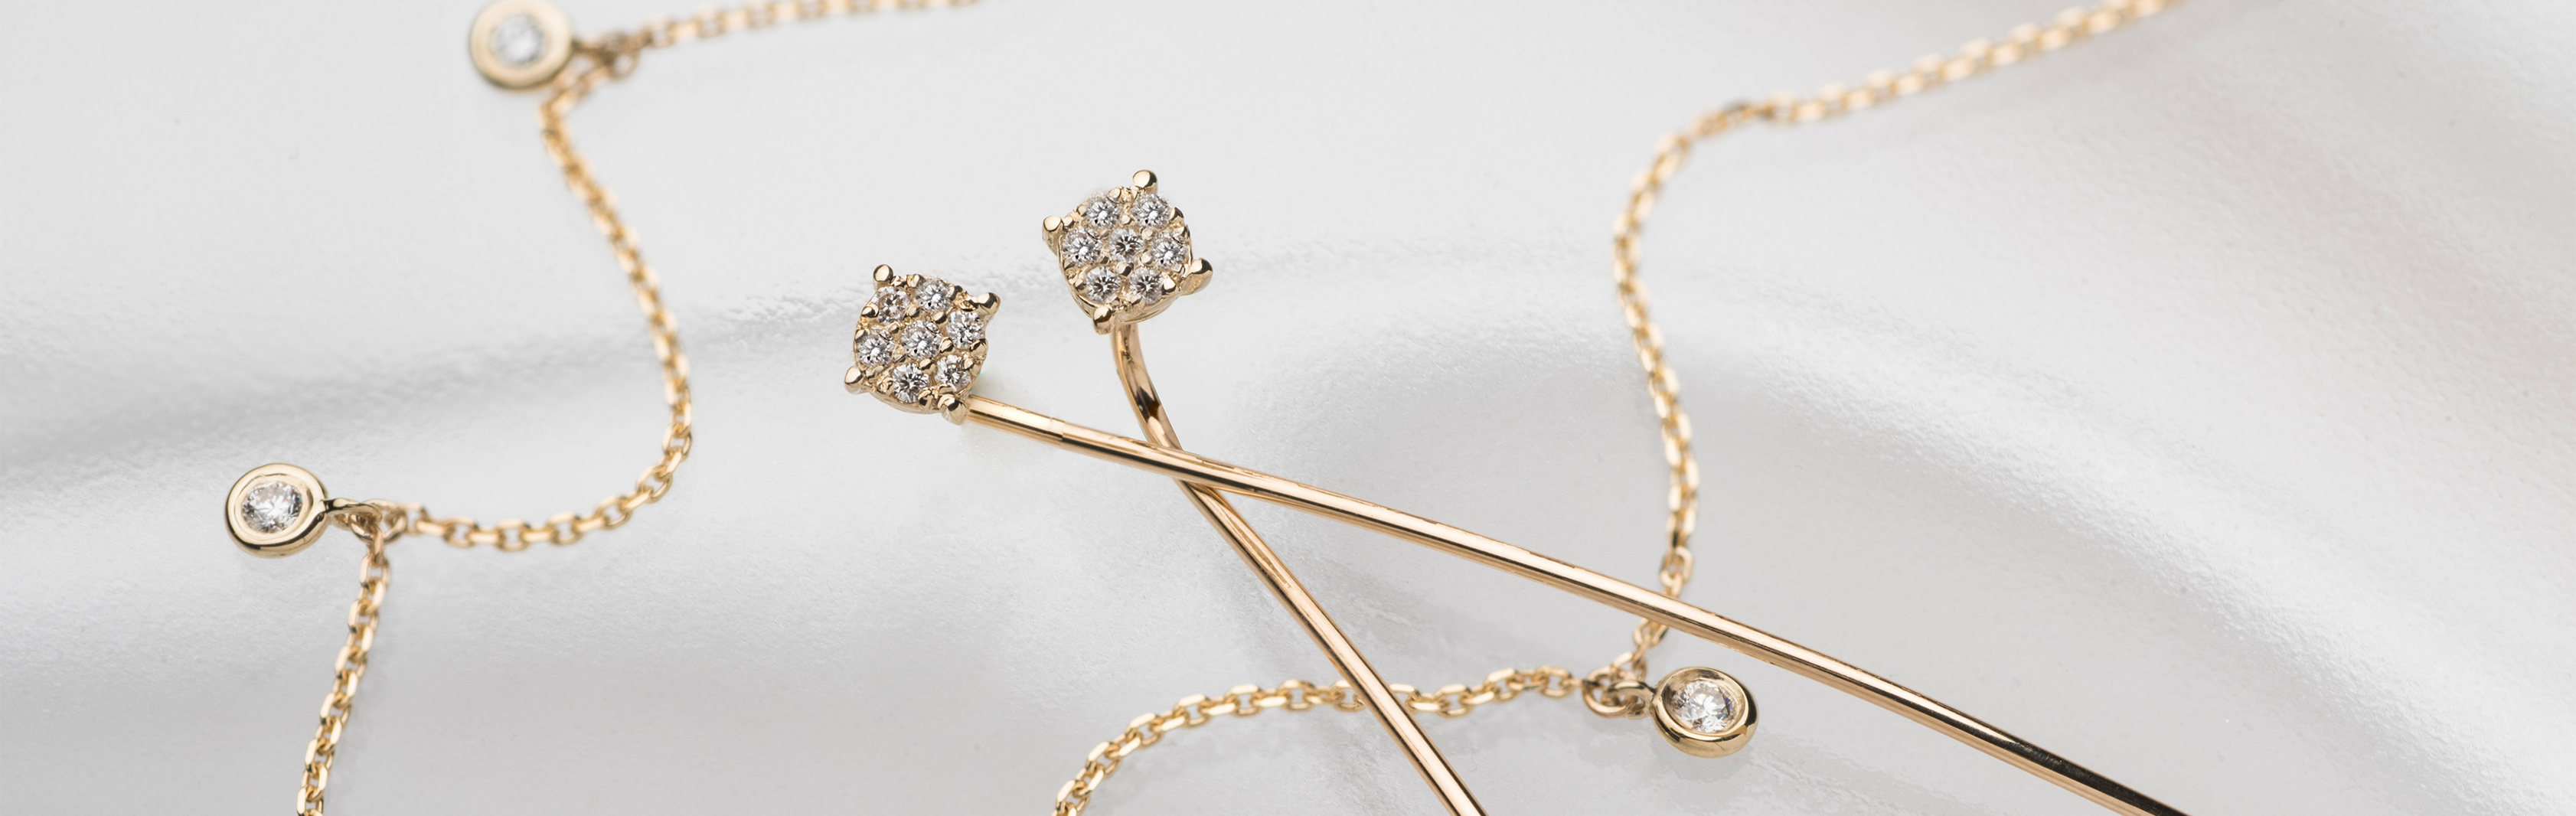 Delphi Collection | 14K Gold and Diamond Jewelry